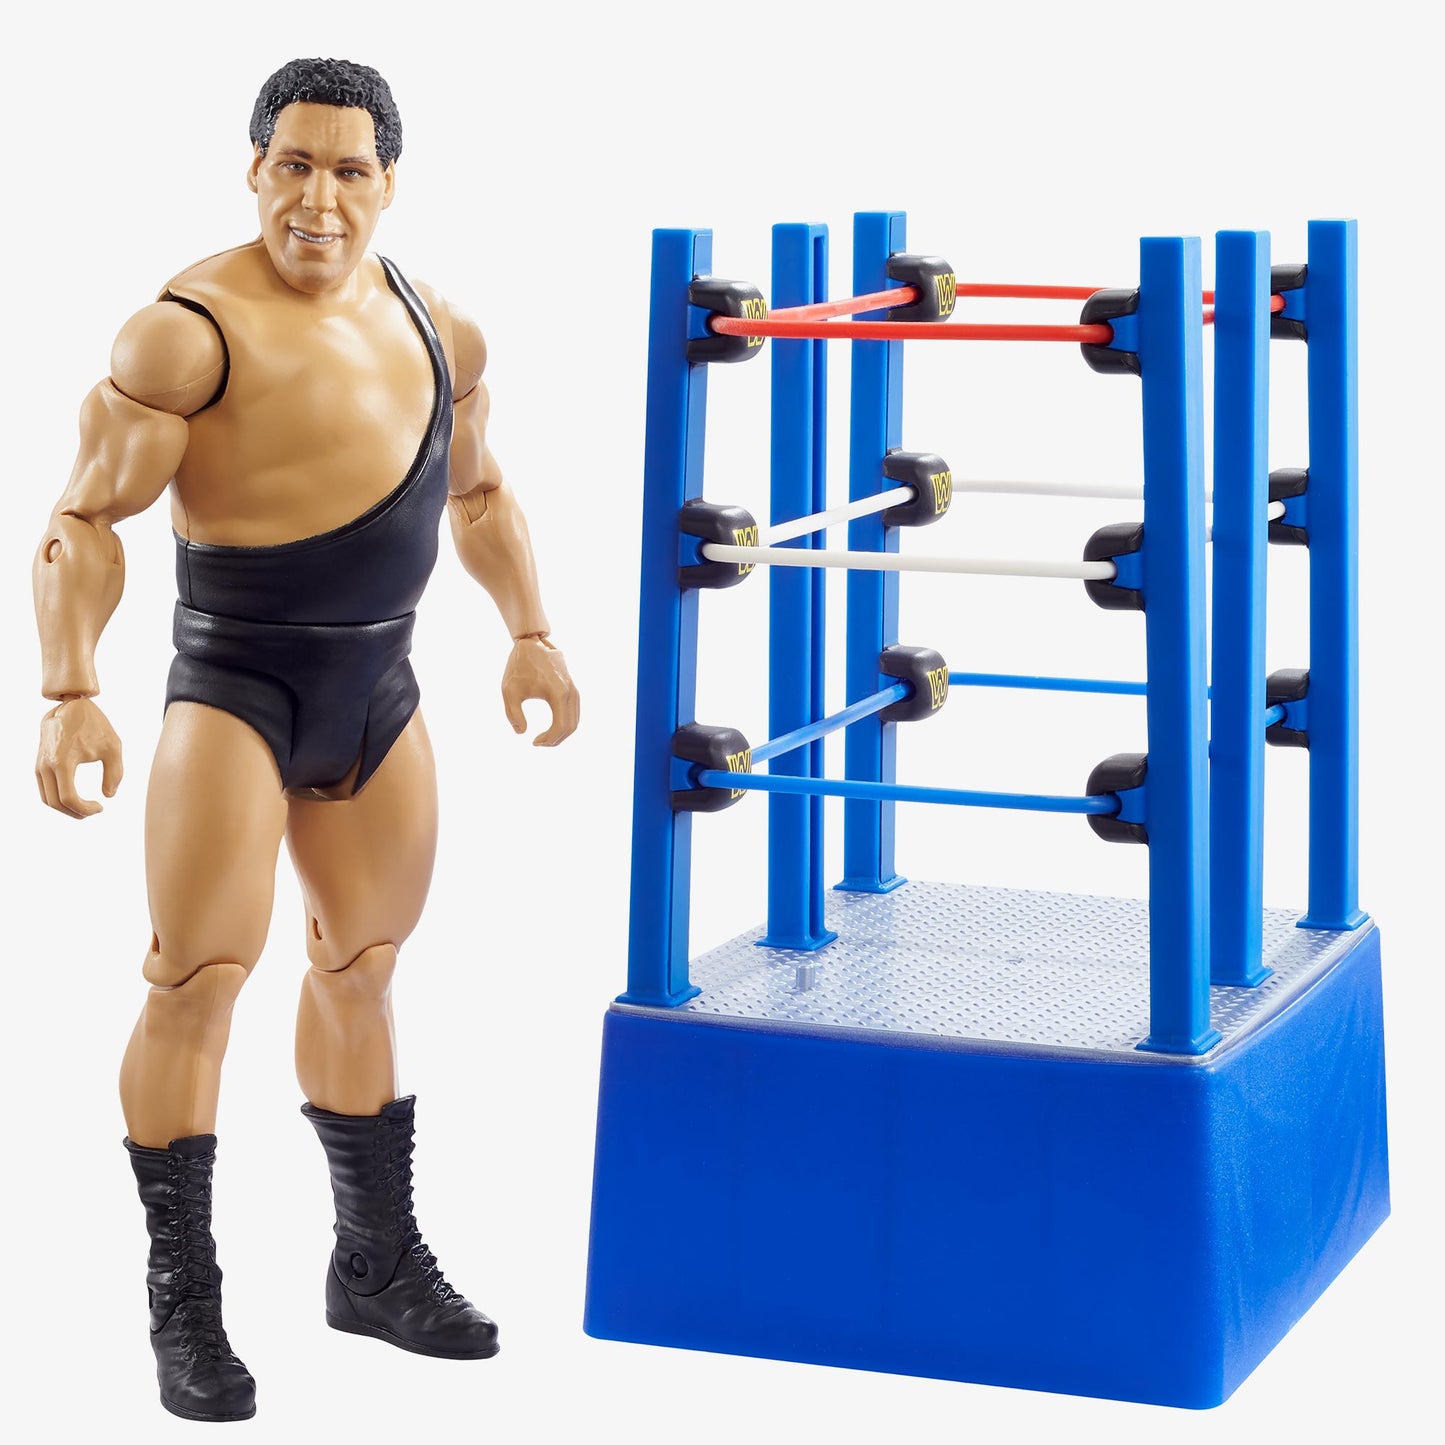 Andre The Giant - WWE WrestleMania 37 Celebration series